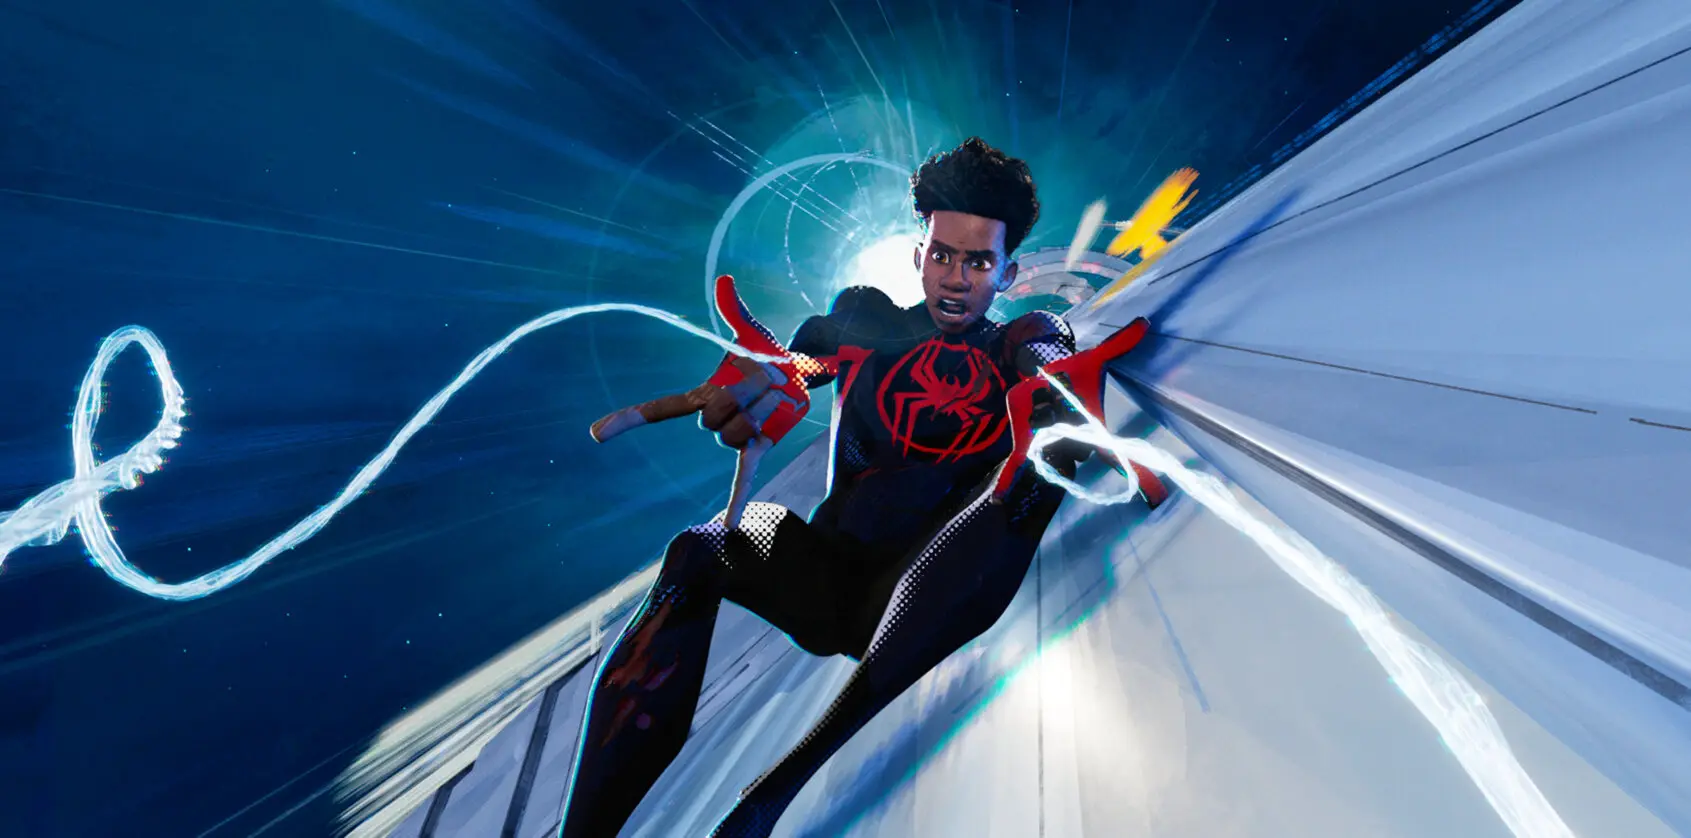 Miles Morales saves the day